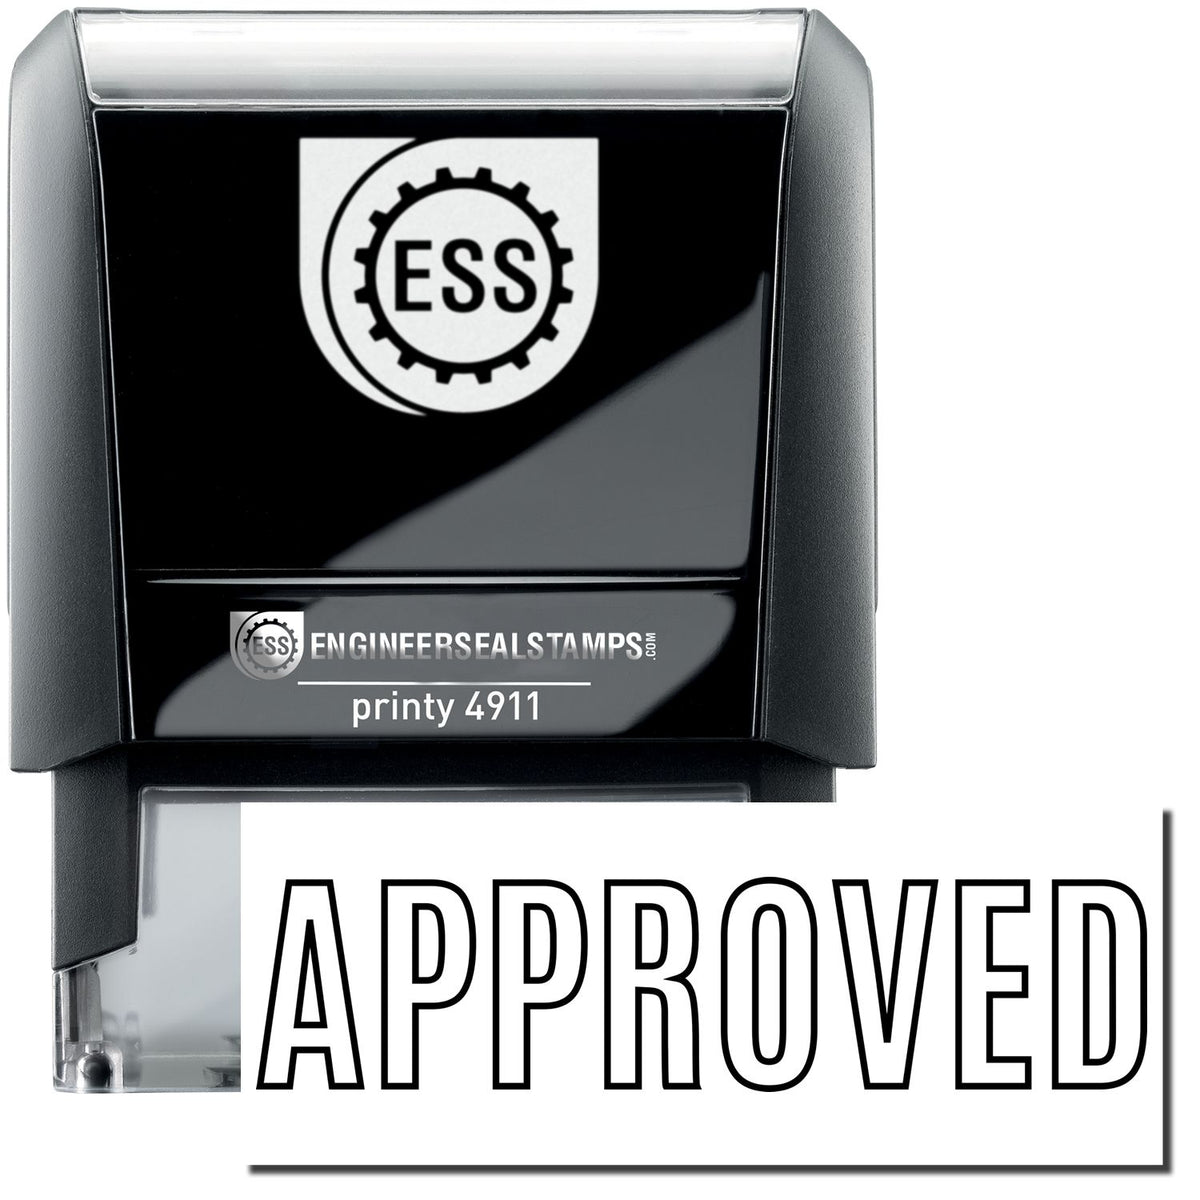 A self-inking stamp with a stamped image showing how the text &quot;APPROVED&quot; in an outline style is displayed after stamping.